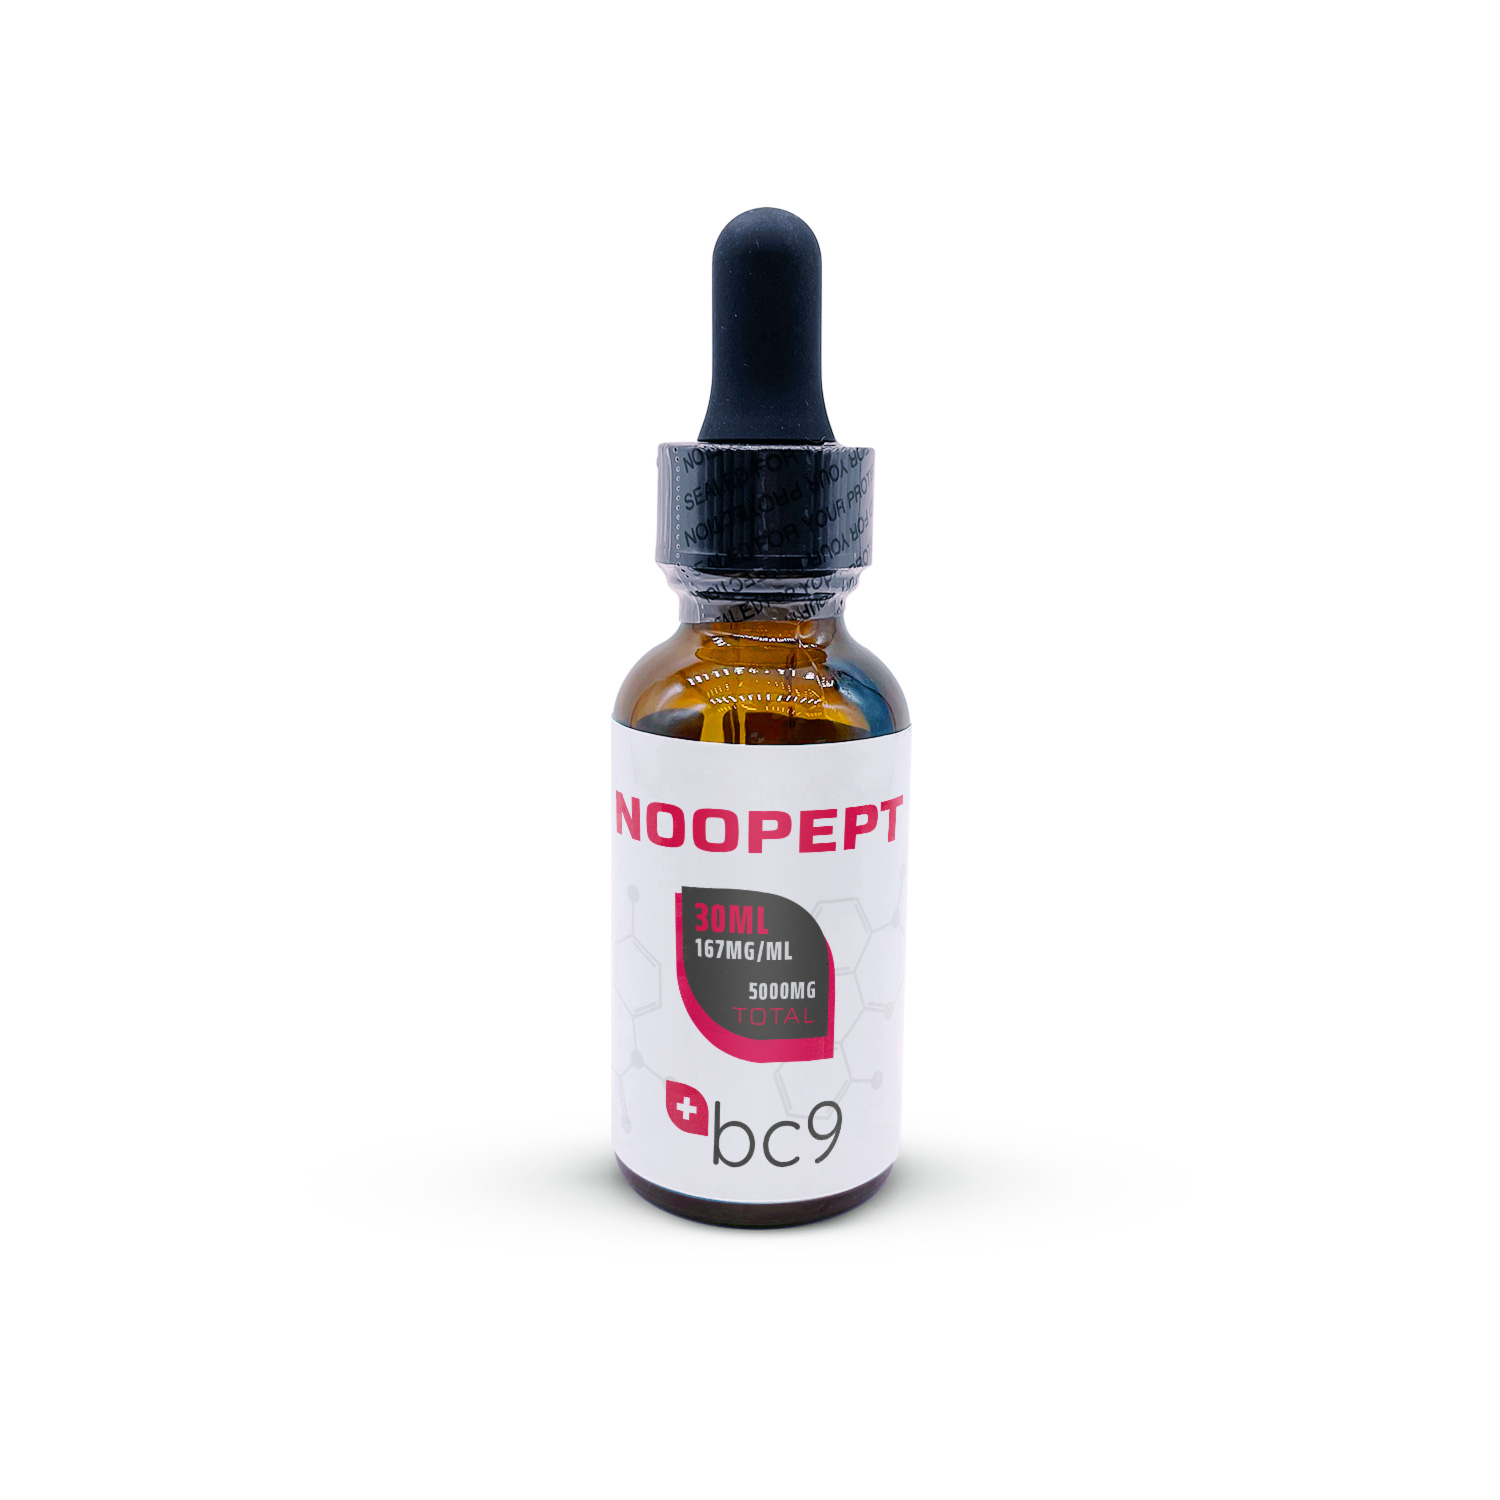 Buy Noopept Liquid For Sale | Fast Shipping | BC9.org